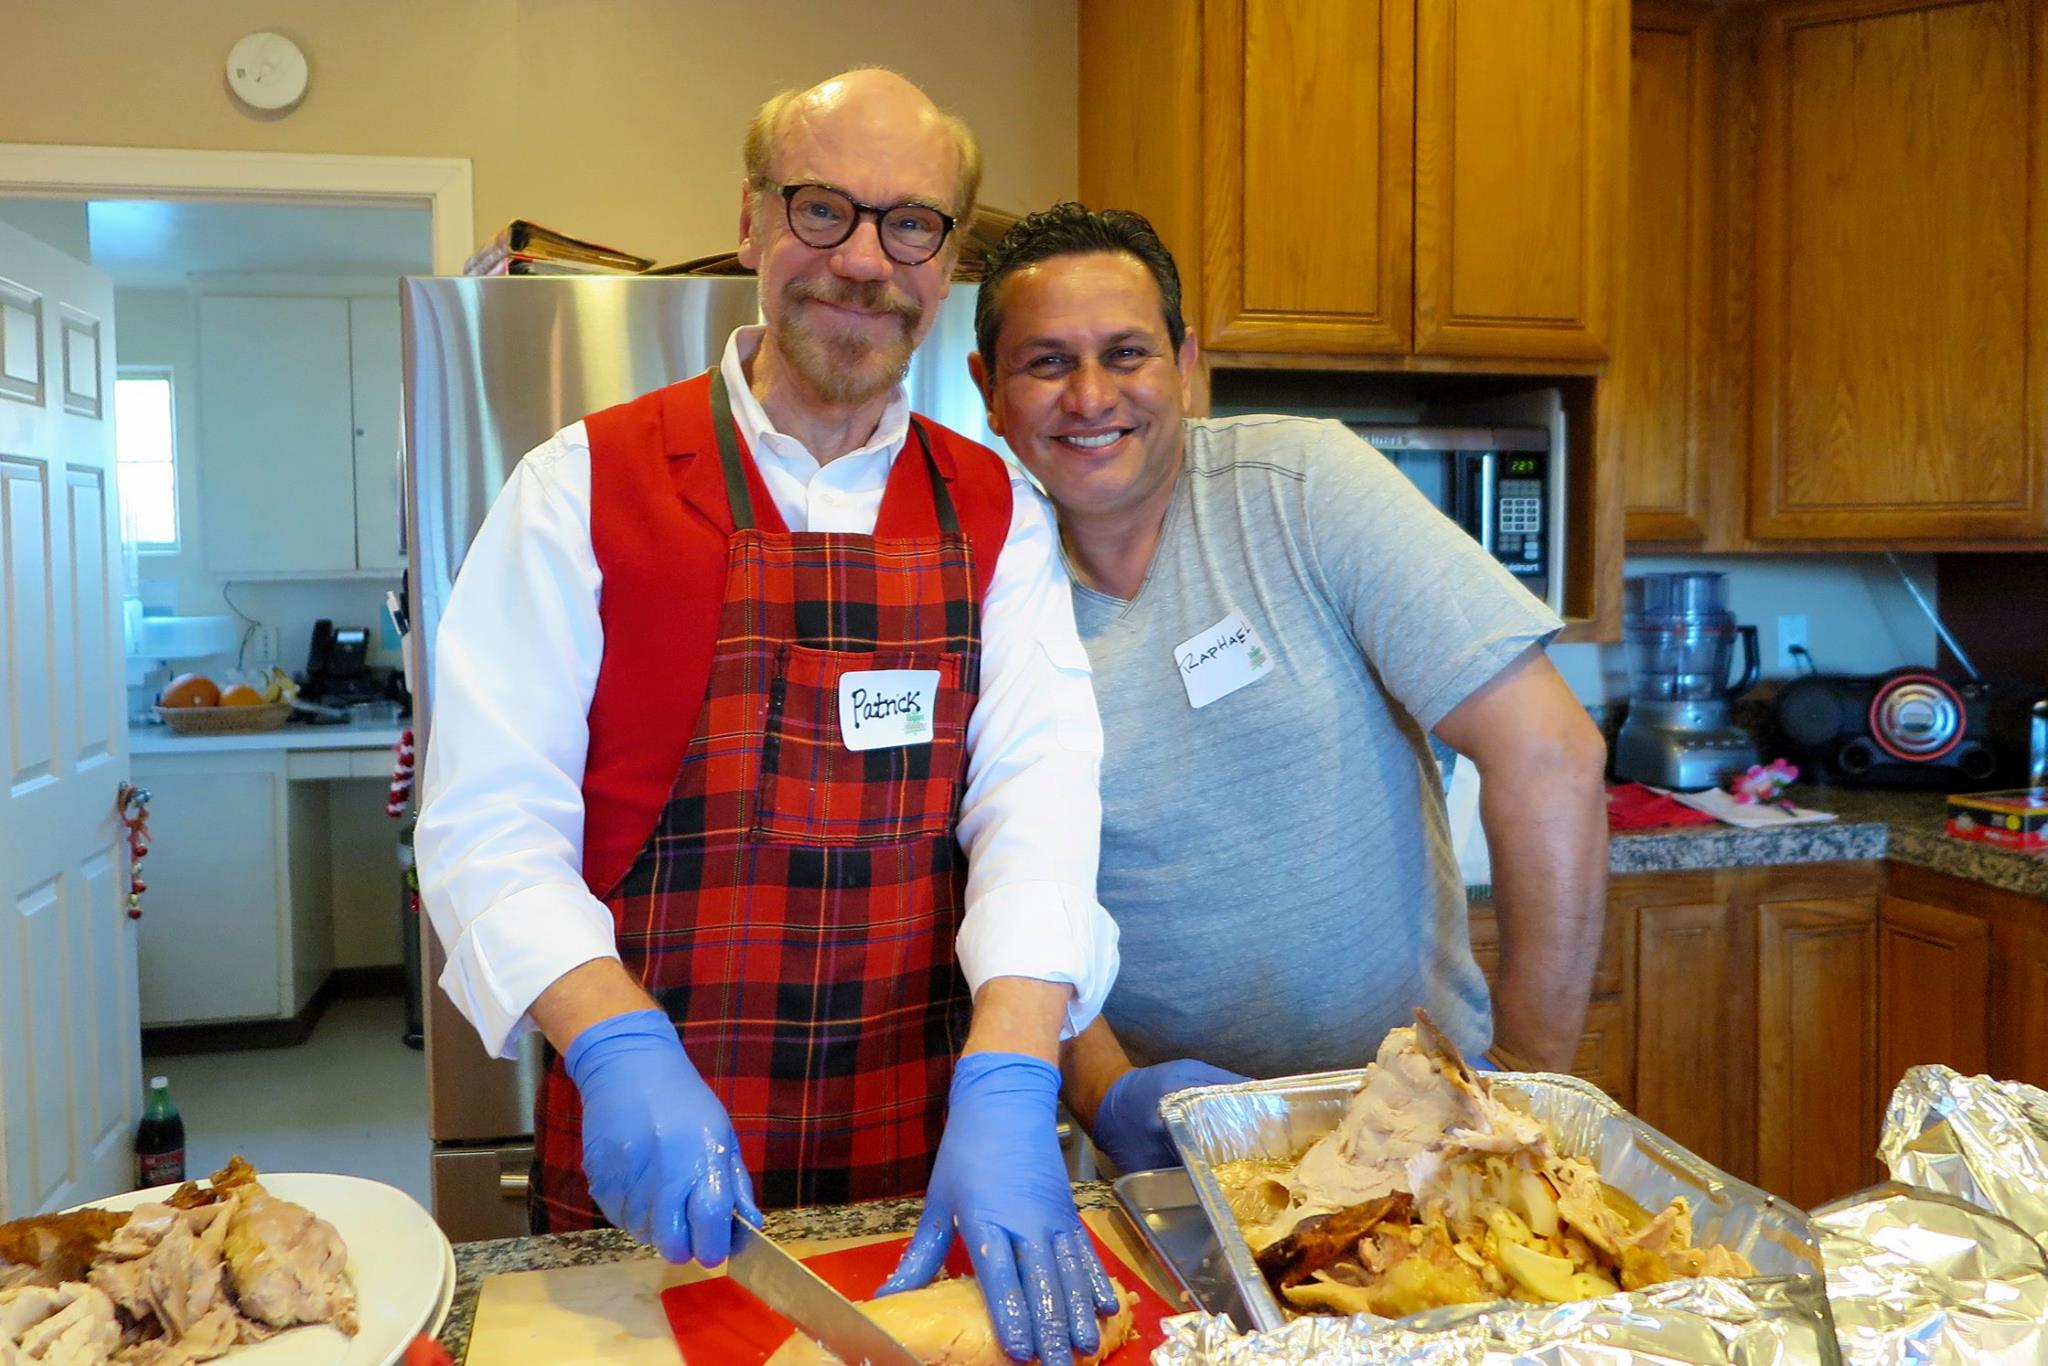 Bring & Serve Dinner at Michaelle House for AIDS/HIV Patients